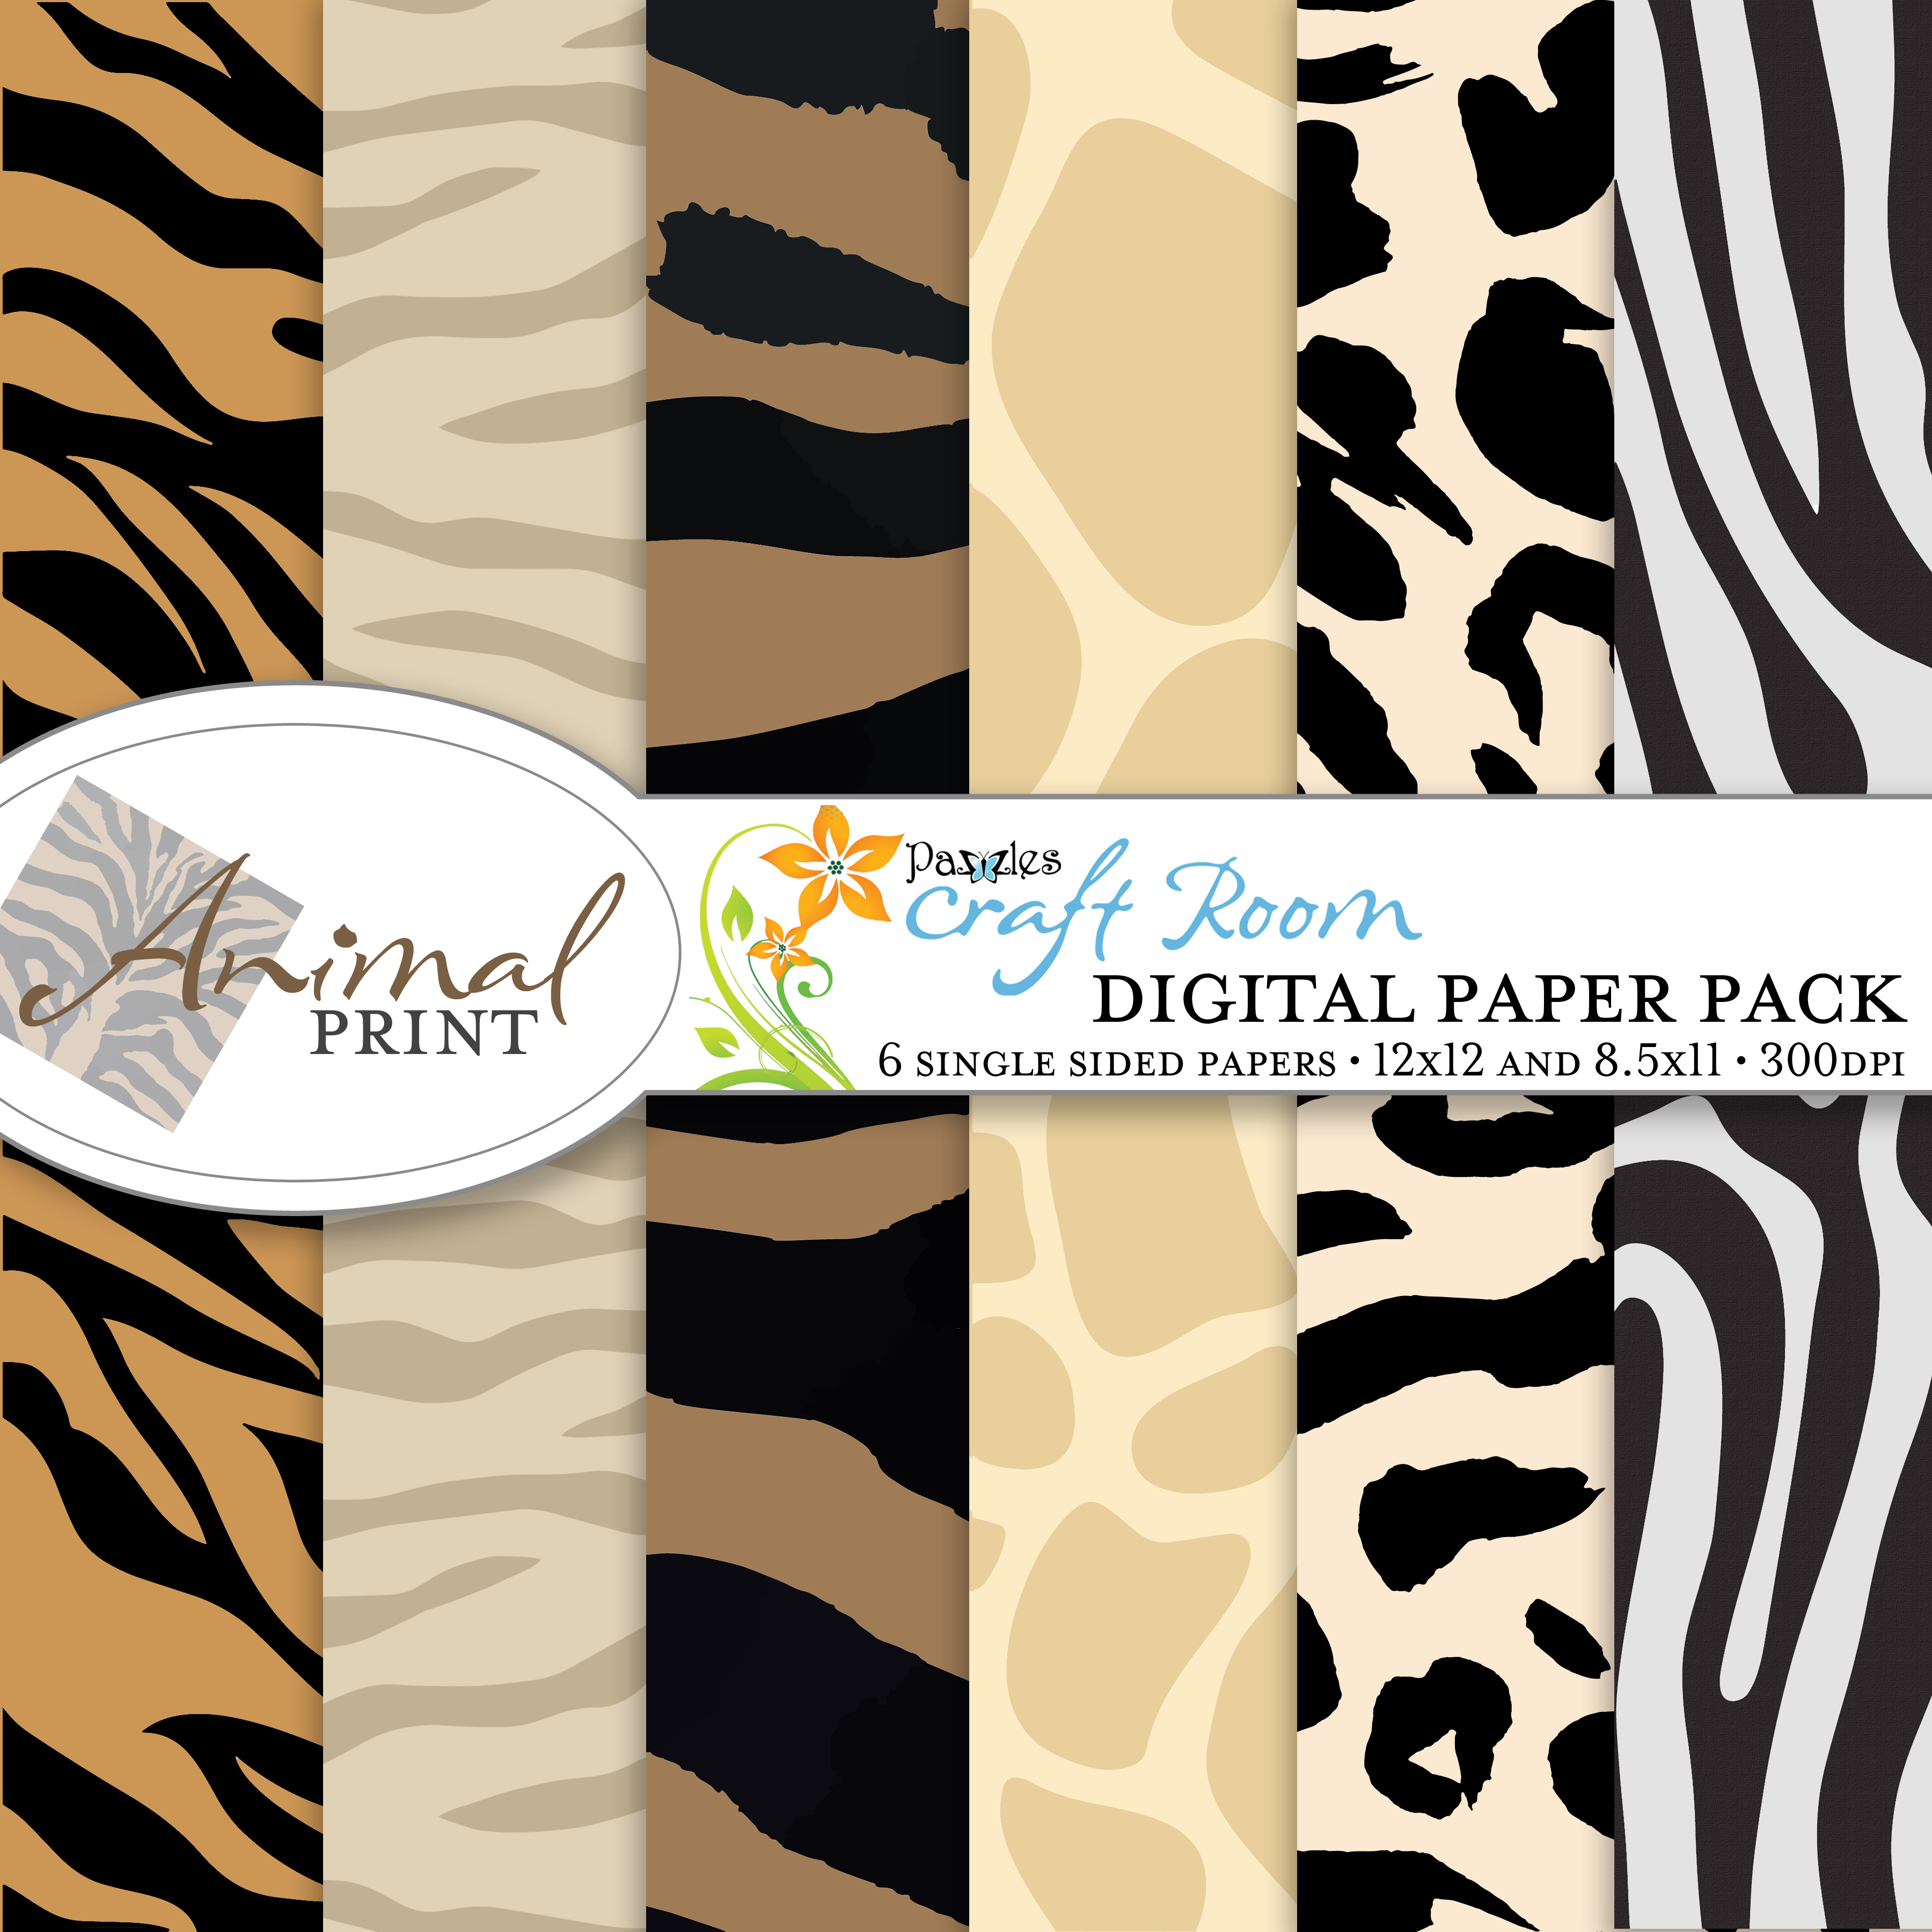 Pazzles Animal Print Digital Paper Pack with instant download. 